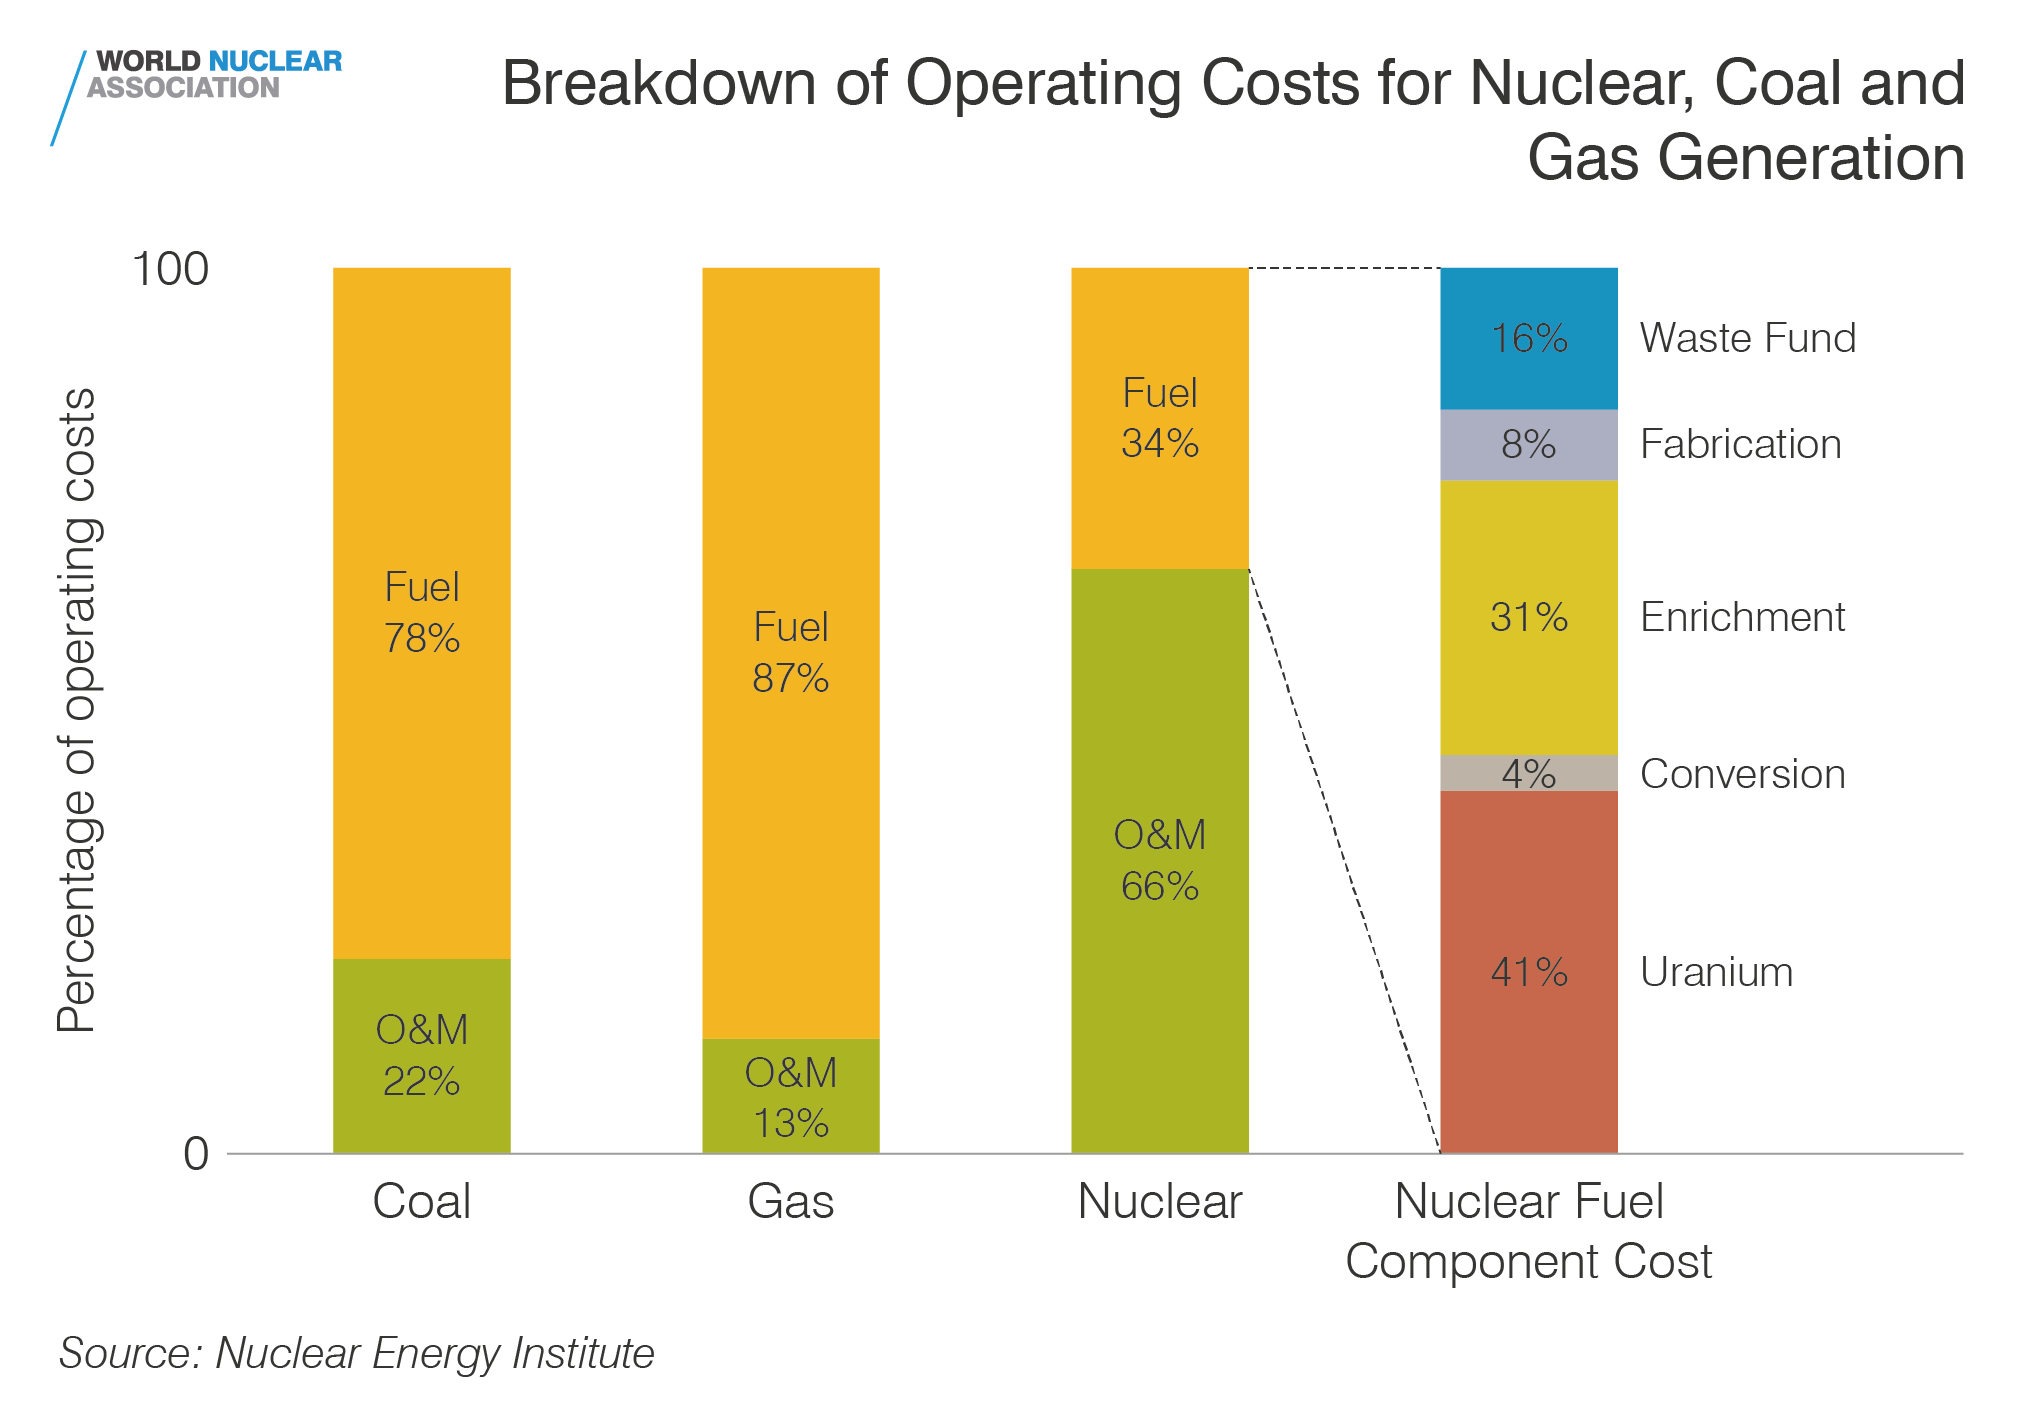 Breakdown of operating costs for nuclear, coal and gas generation